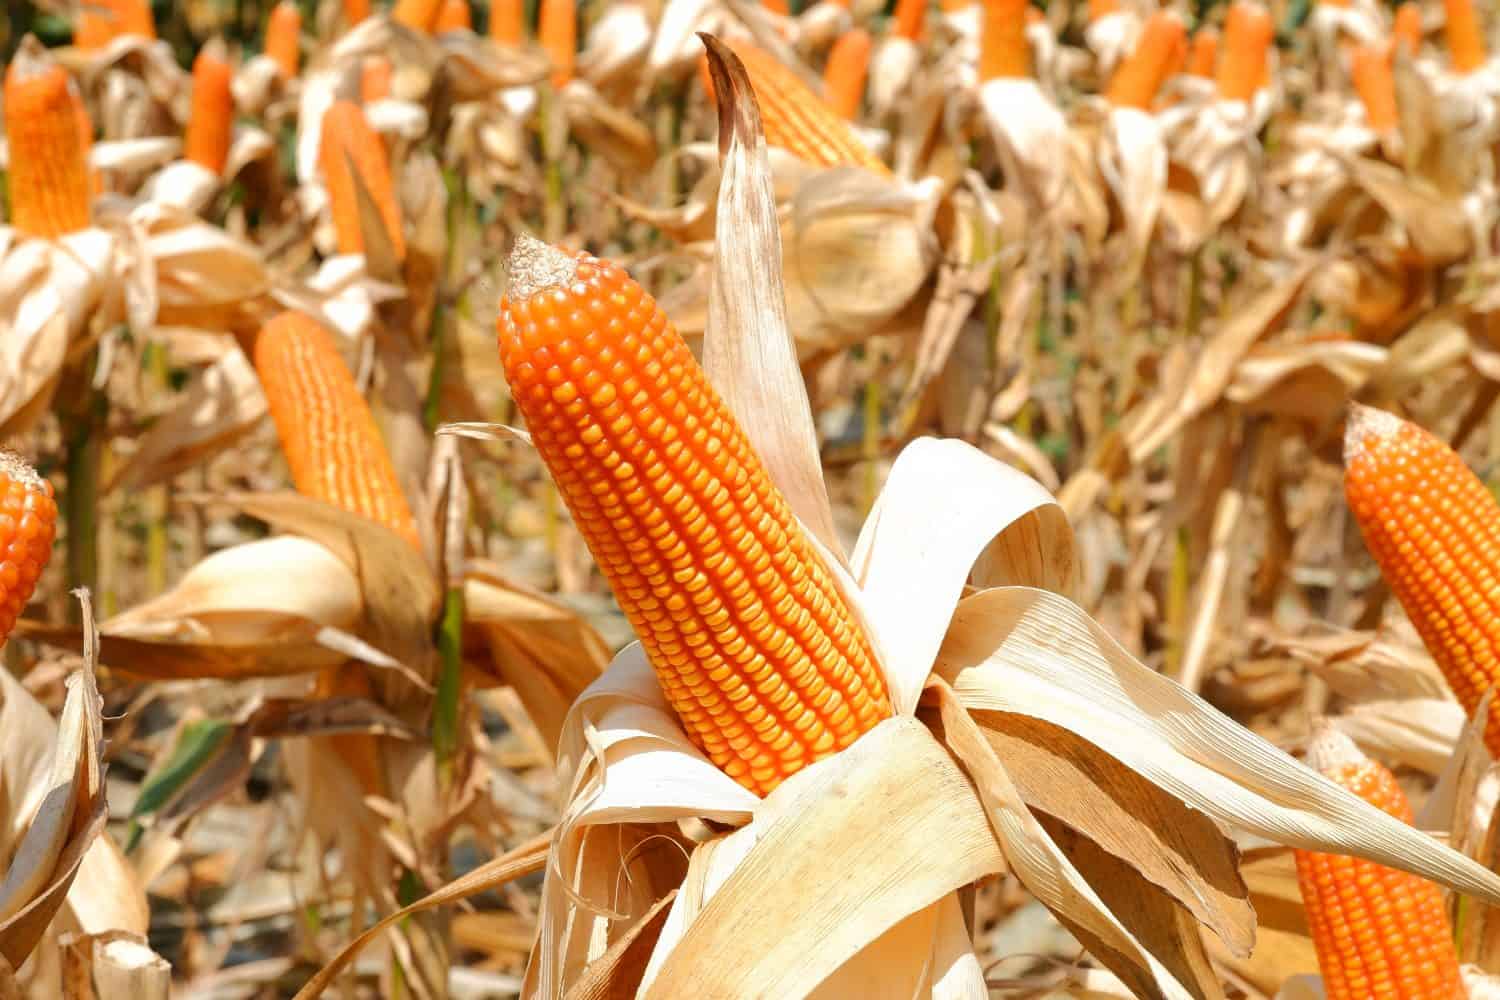 The Yellow Guinea variety of corn is actually an orange color.